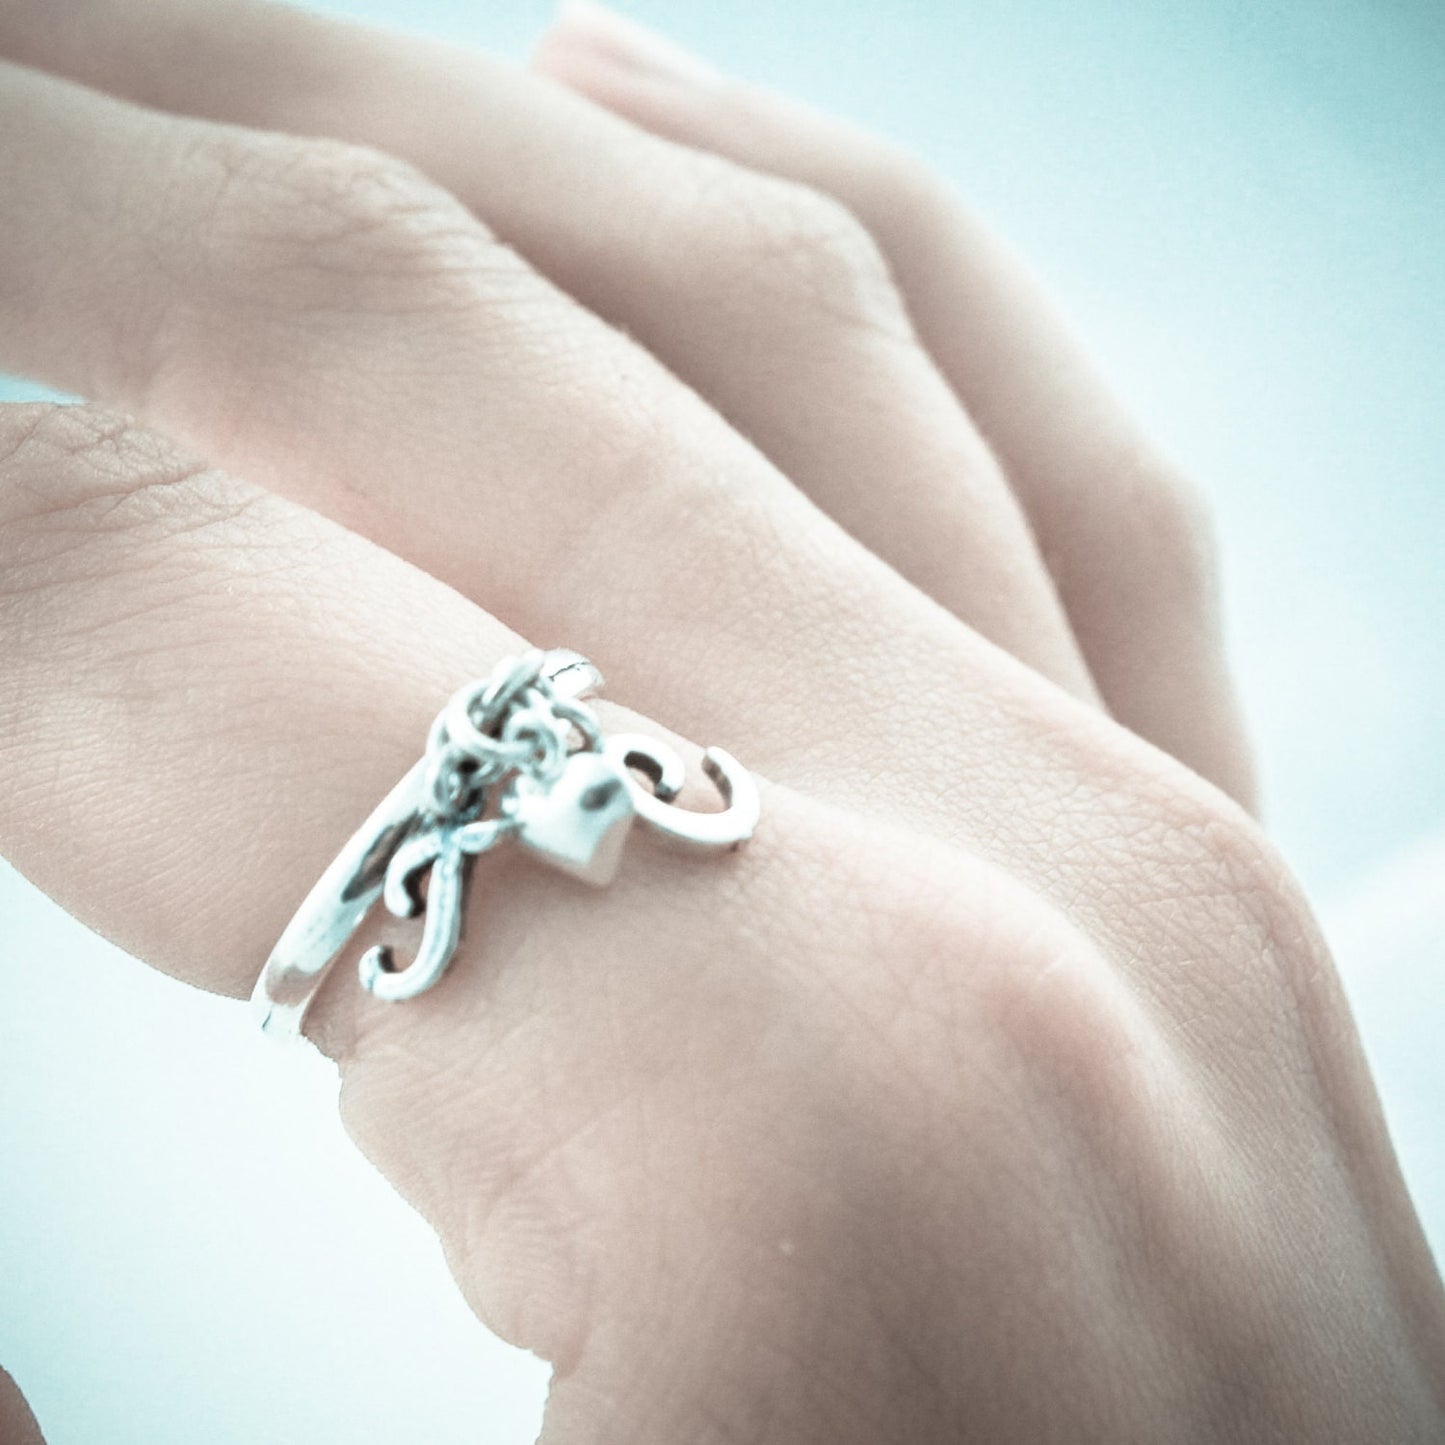 Initial Charm Ring. Sterling Silver Initial Ring. Dangle Ring. Personalized Jewelry. Initial Jewelry.